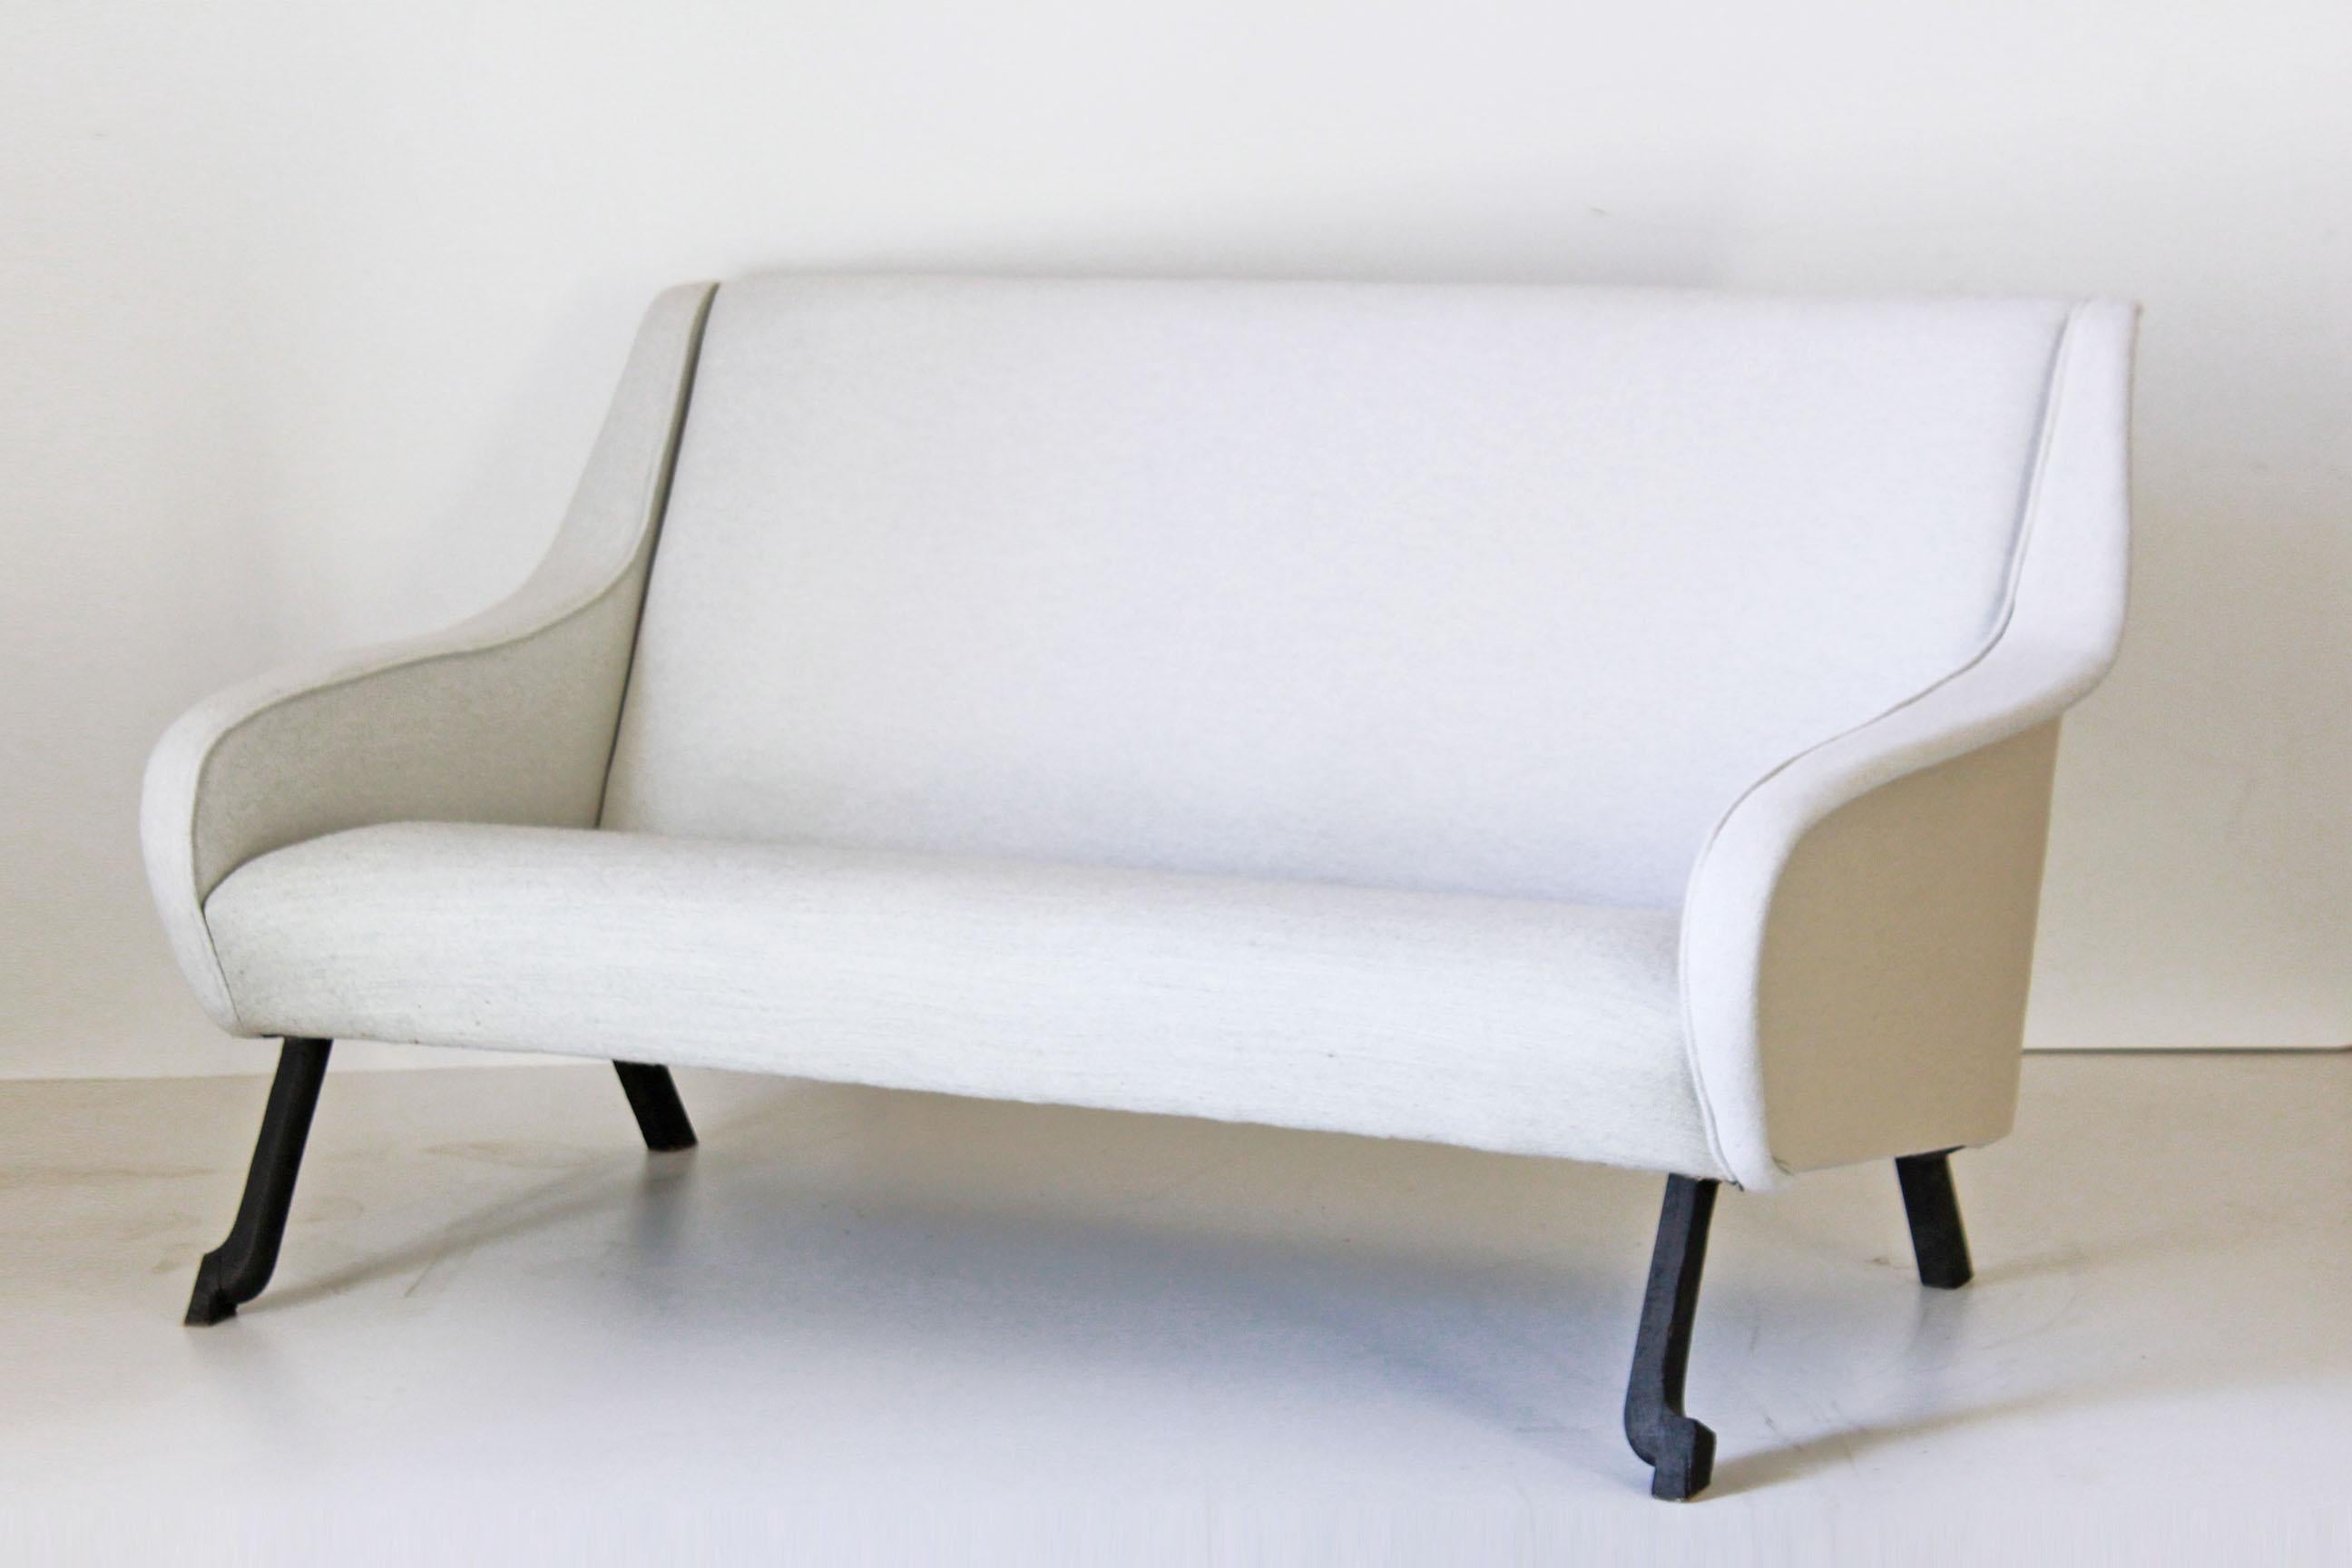 A 1950s two seats vintage sofa with fabric cover and wood legs. Wood legs have been traited through the use of Japanese wood preserving technique 